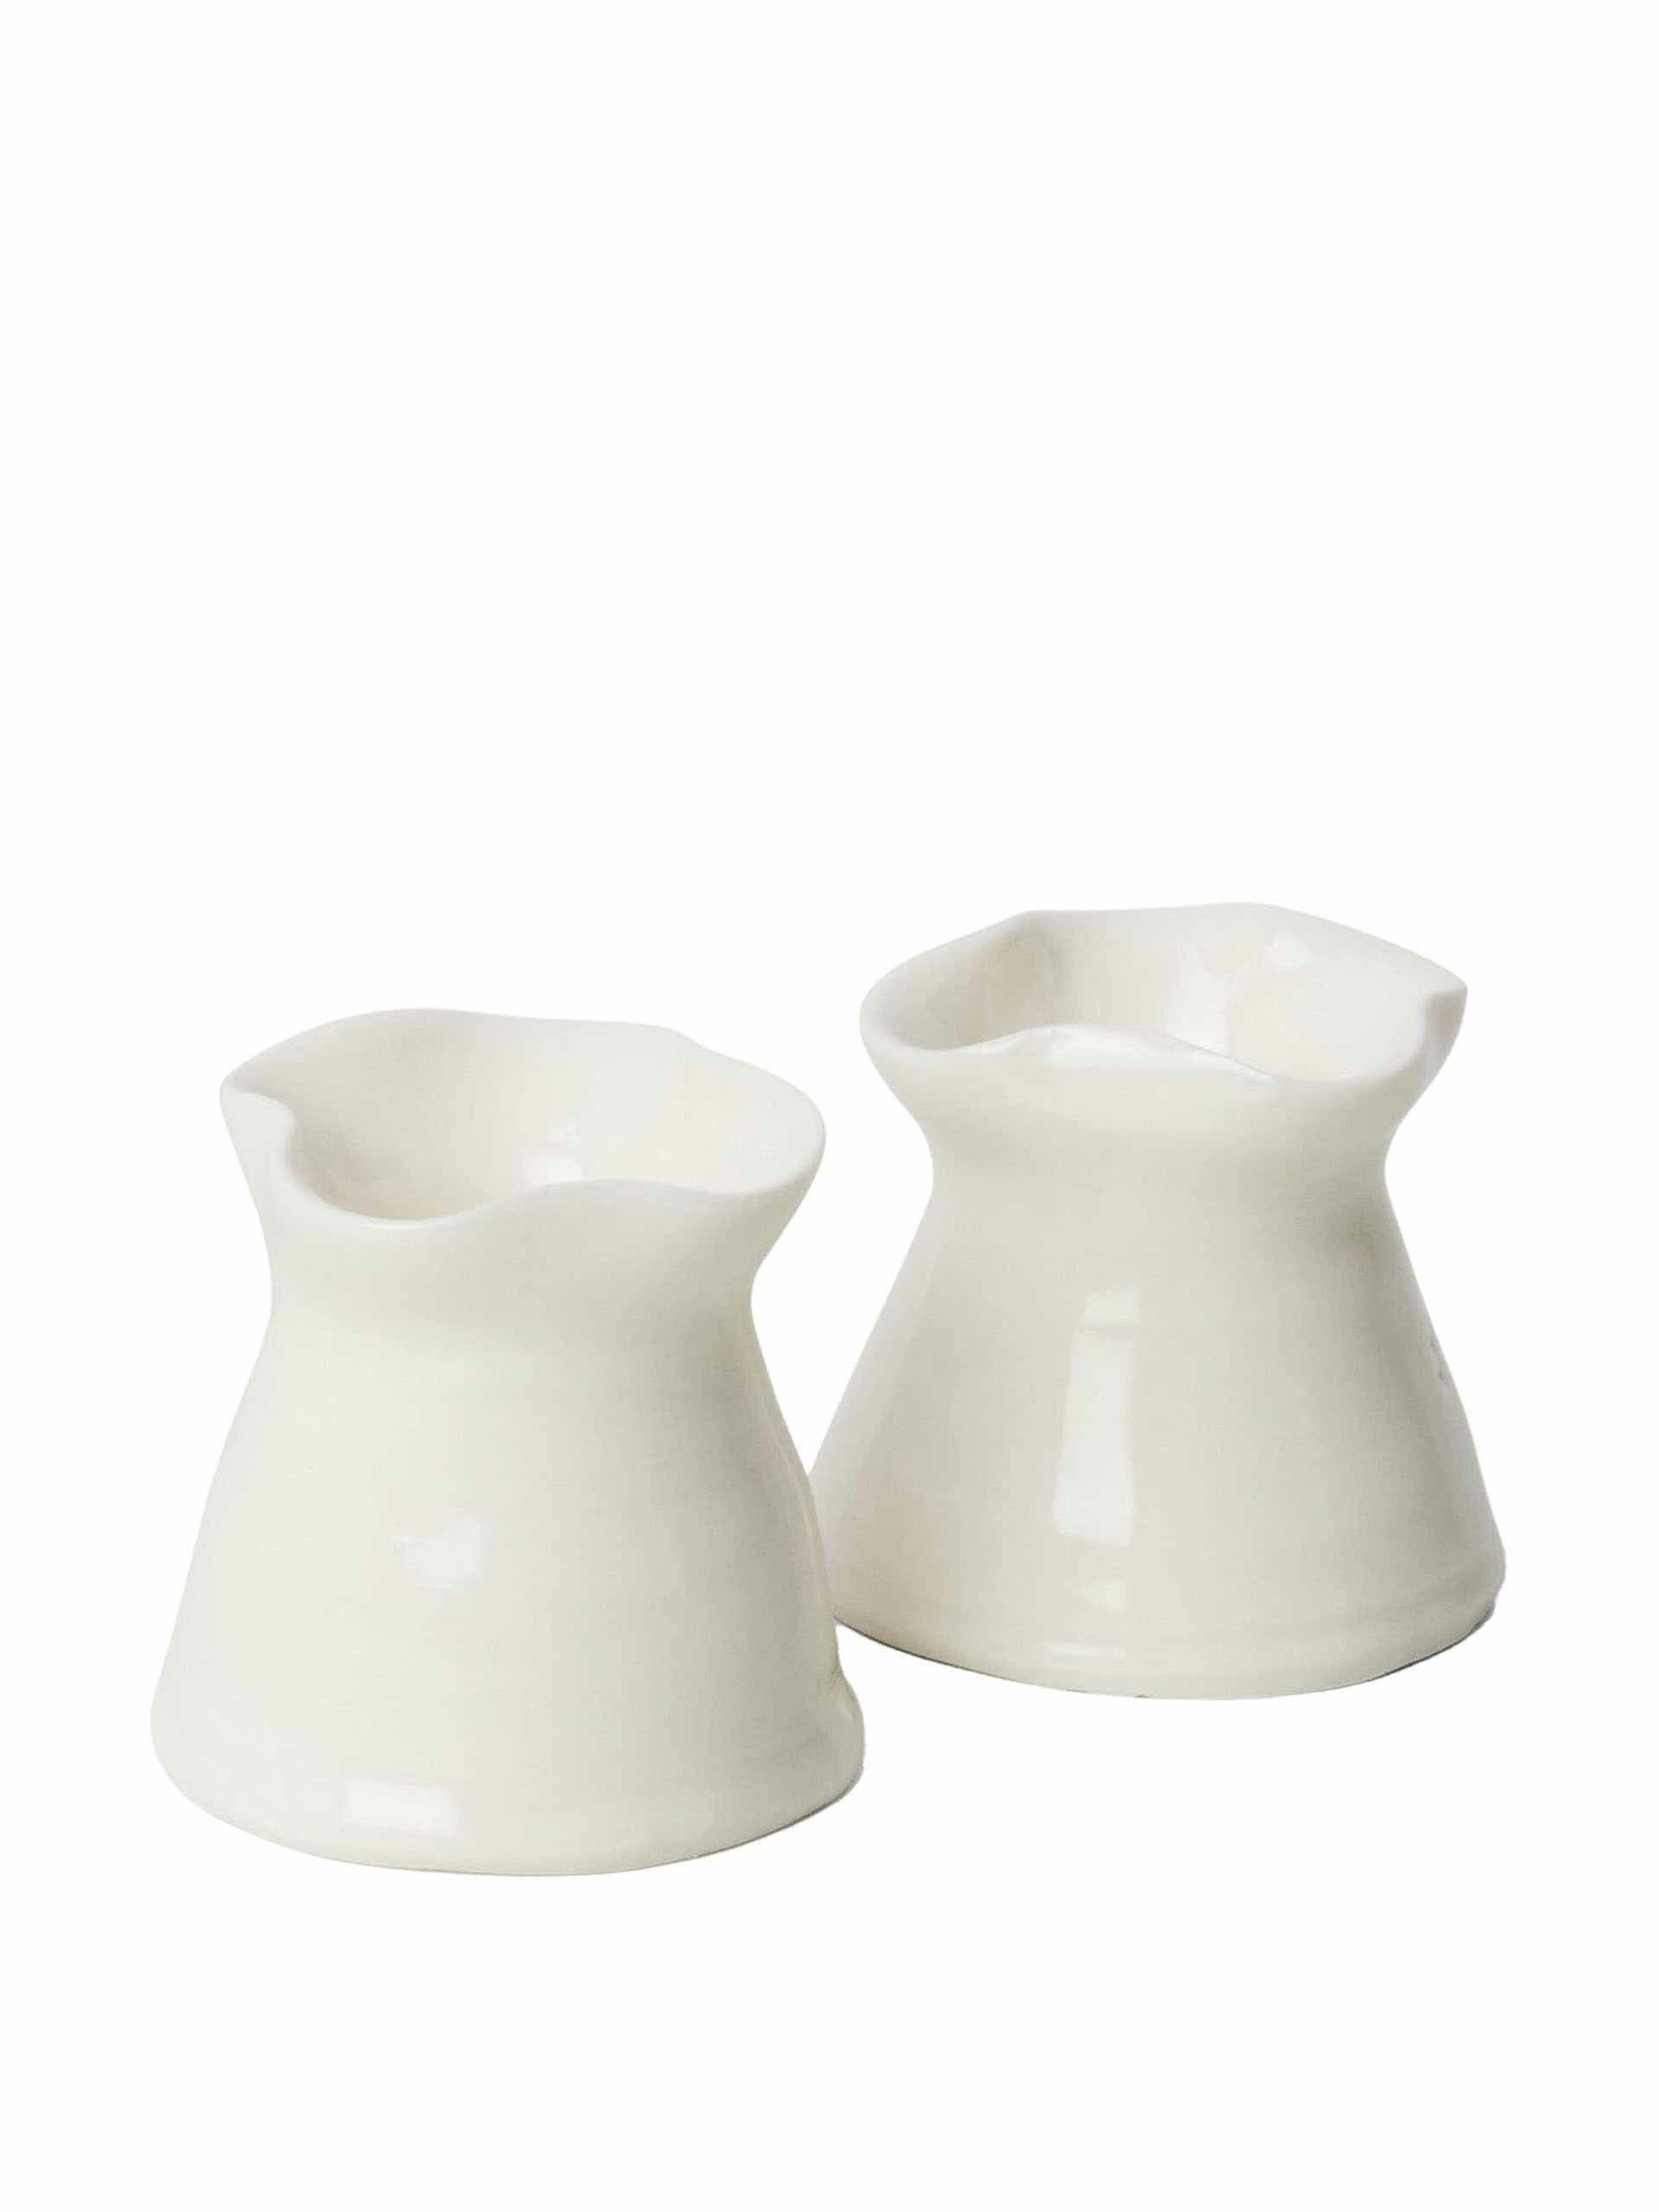 Pair of porcelain candleholders